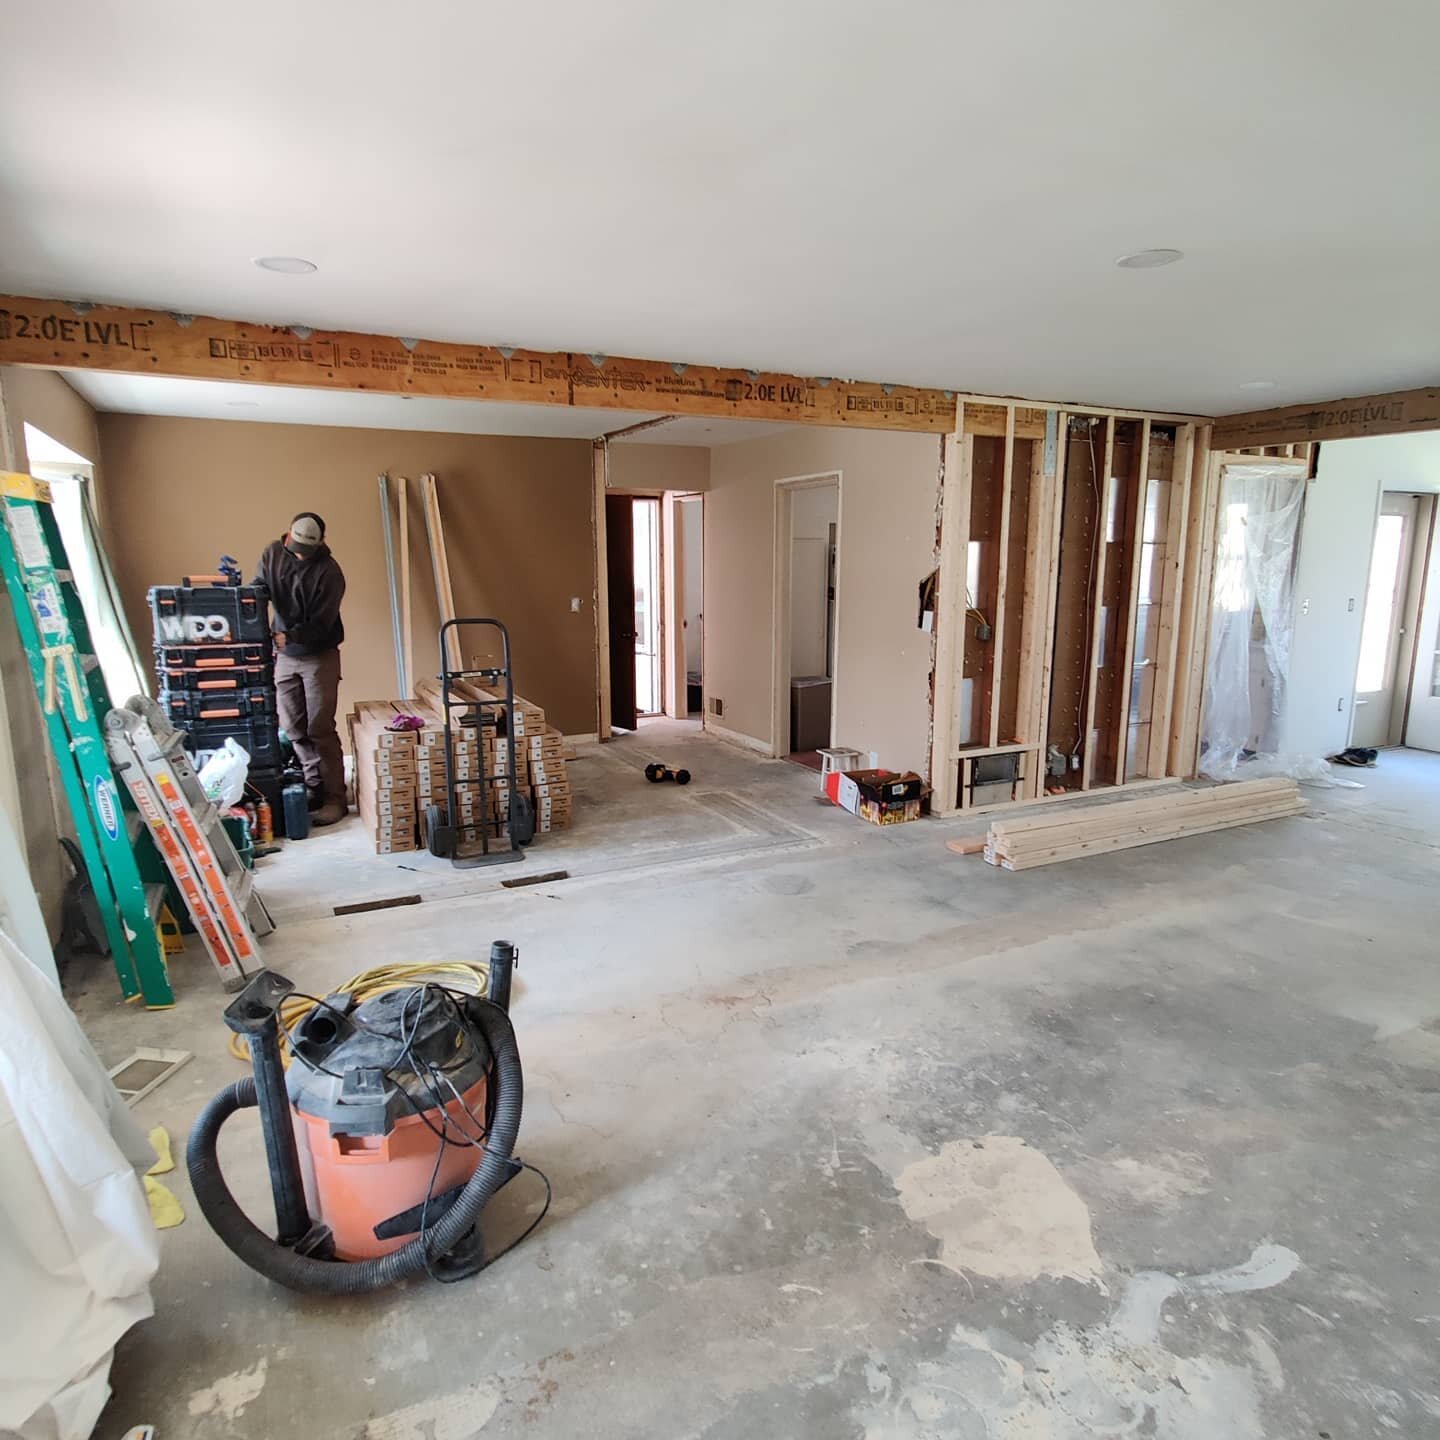 Update on our midtown project;

Framing inspection approved...totally ready to get this one closed up!!! 🤙👏

Flooring arrived and we're having a go at designing and finalizing the fireplace makeover 😔 We need ideas! @stevenollette we'd love to see